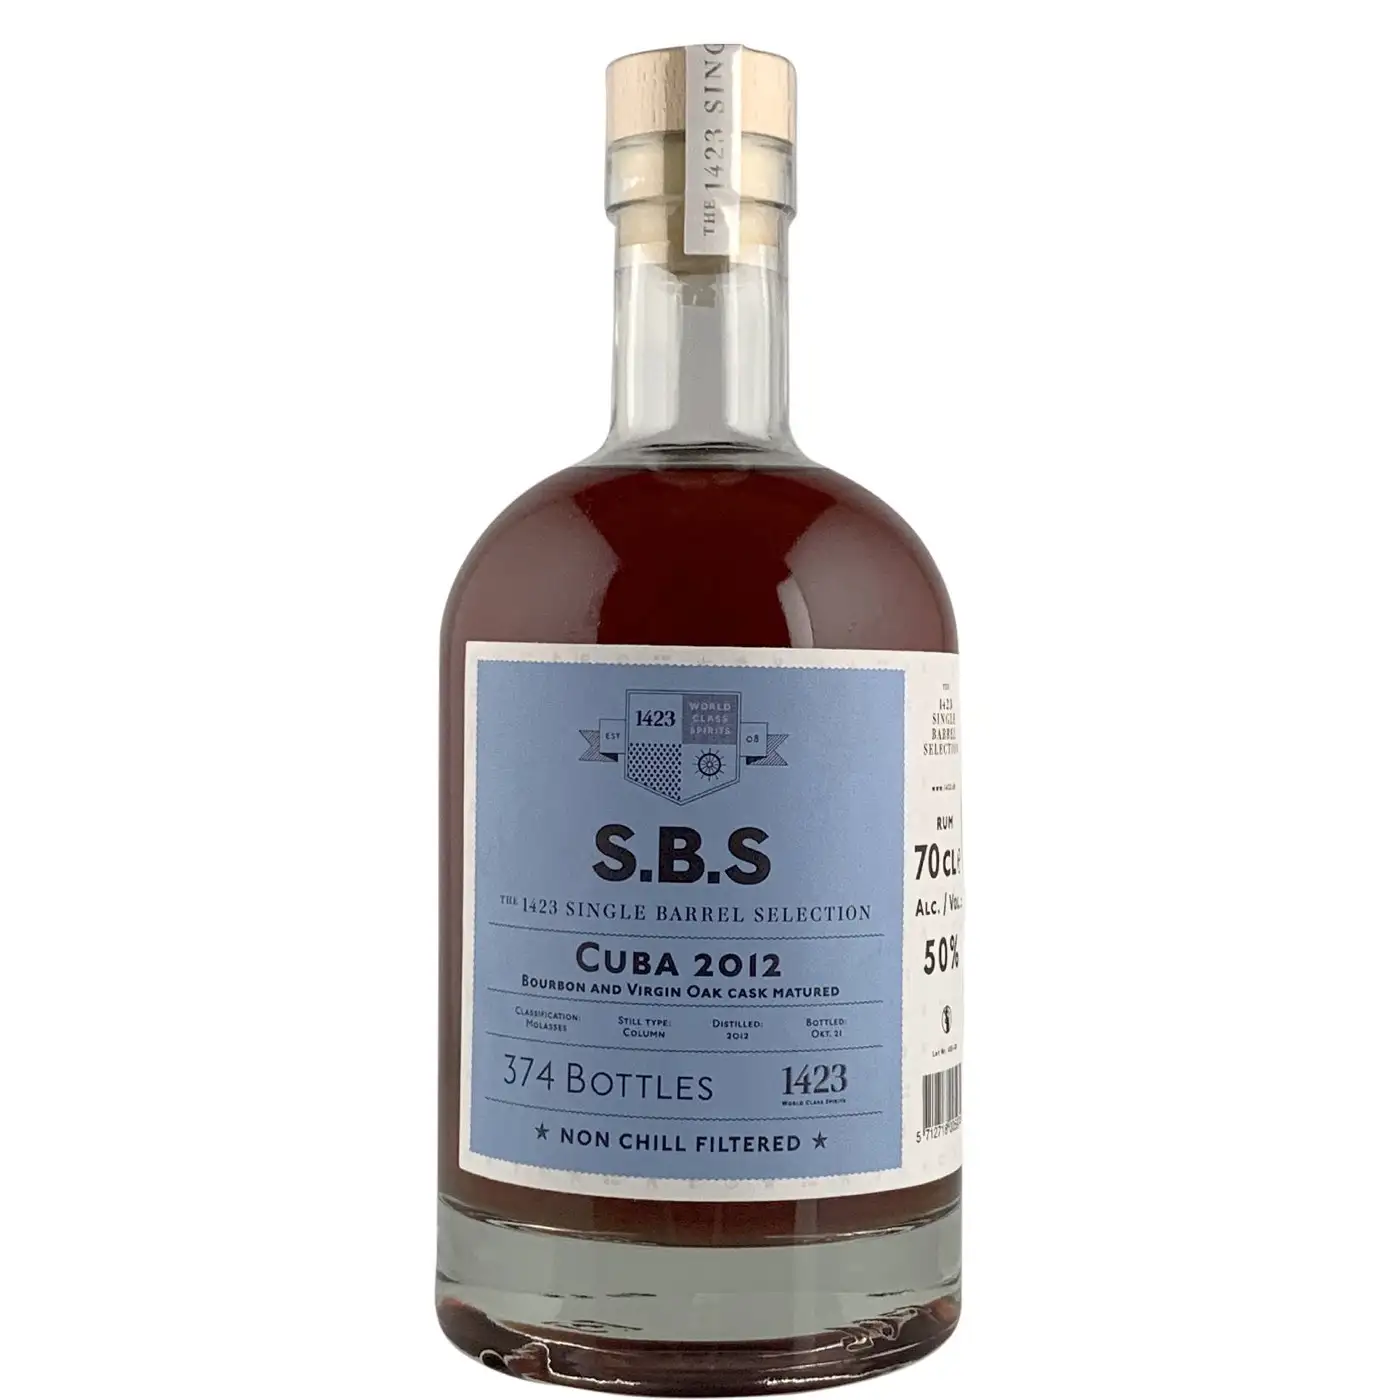 Image of the front of the bottle of the rum S.B.S Cuba